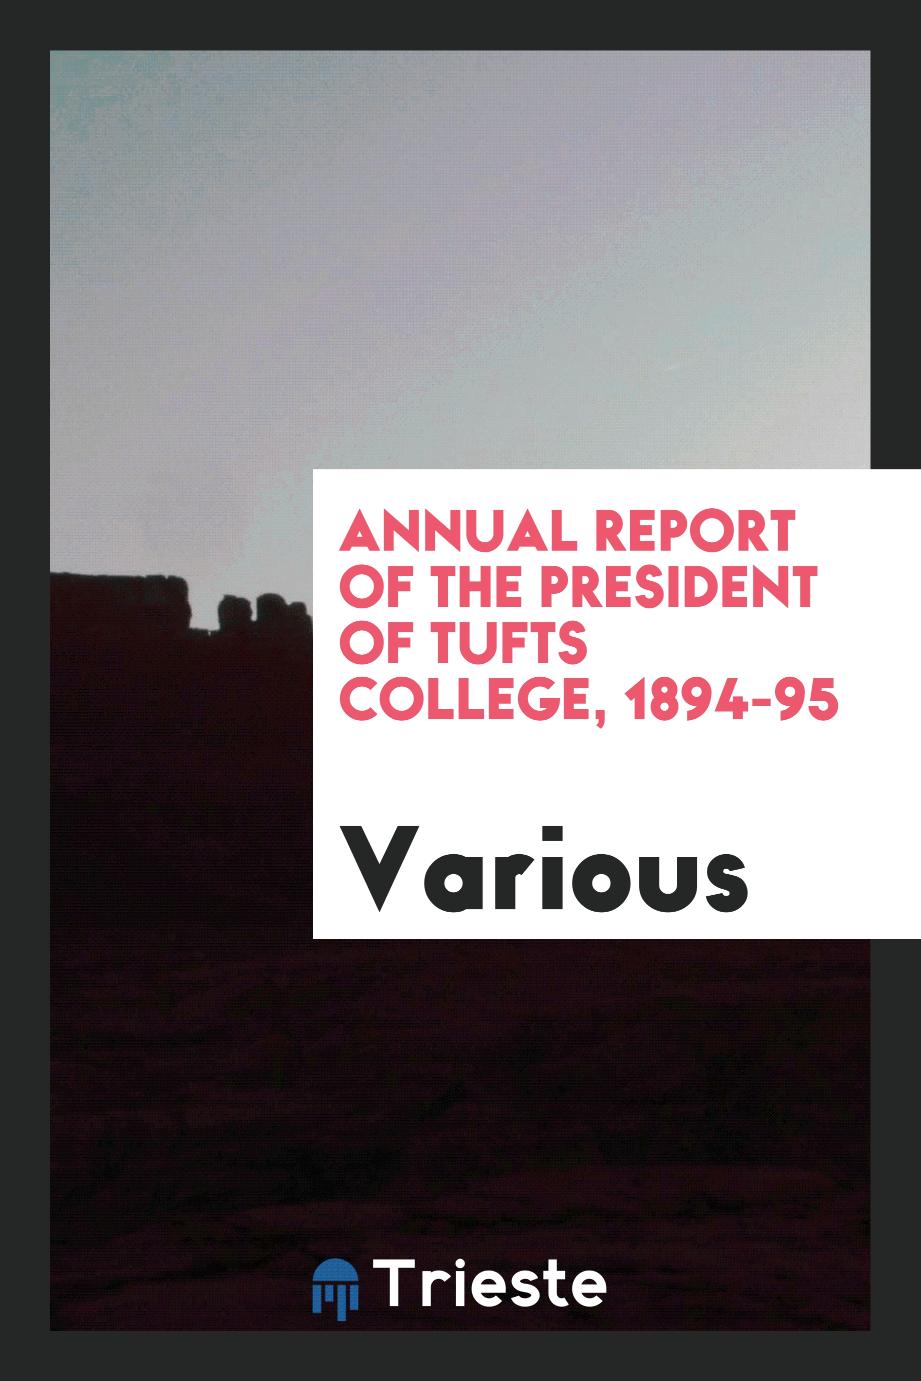 Annual report of the President of Tufts College, 1894-95